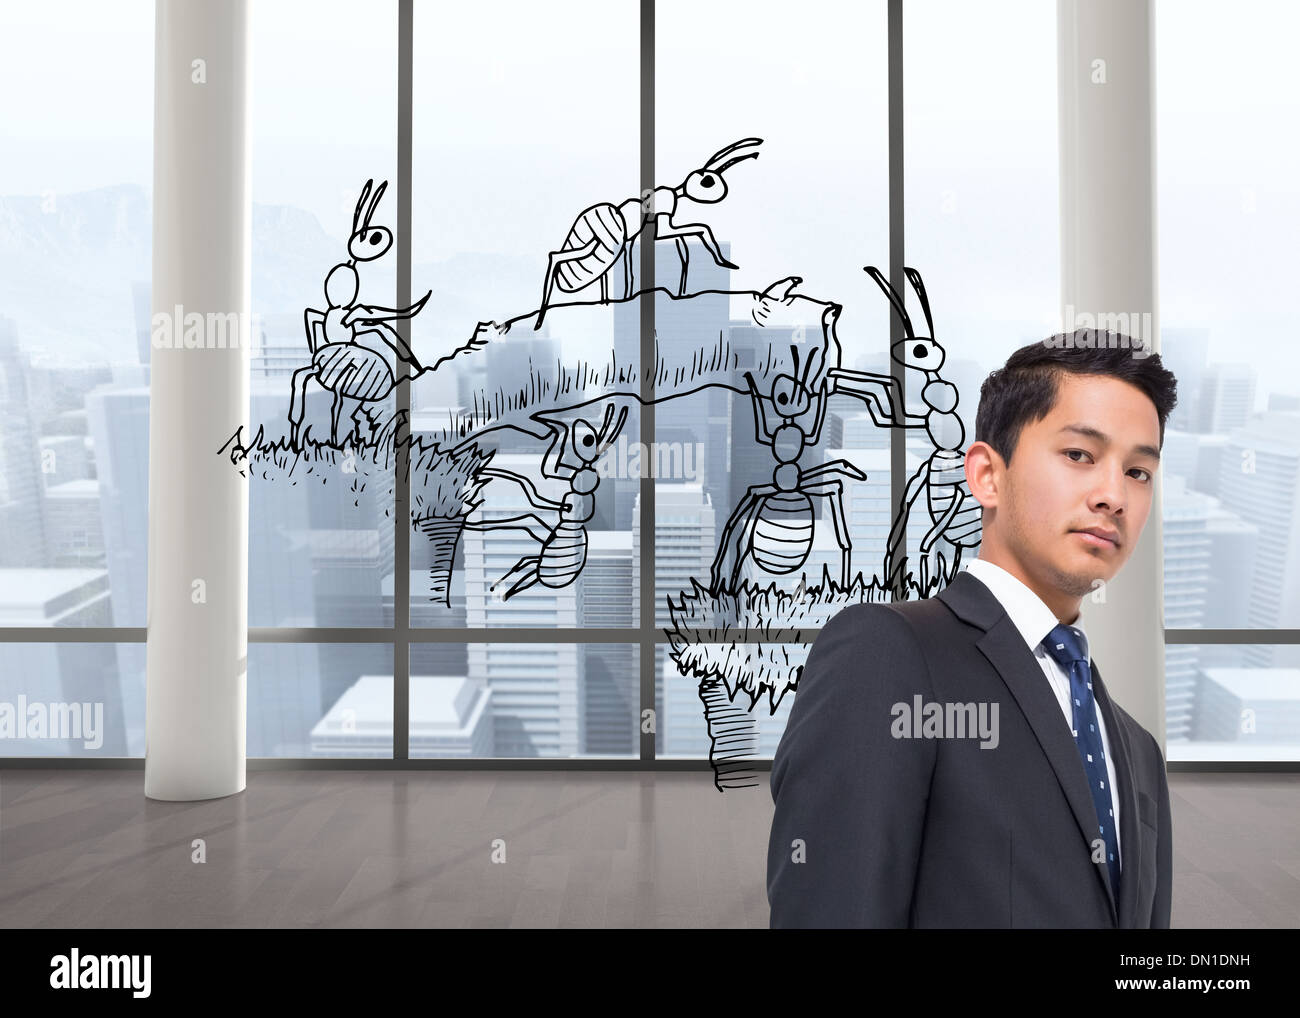 Composite image of working ants in room with big windows Stock Photo